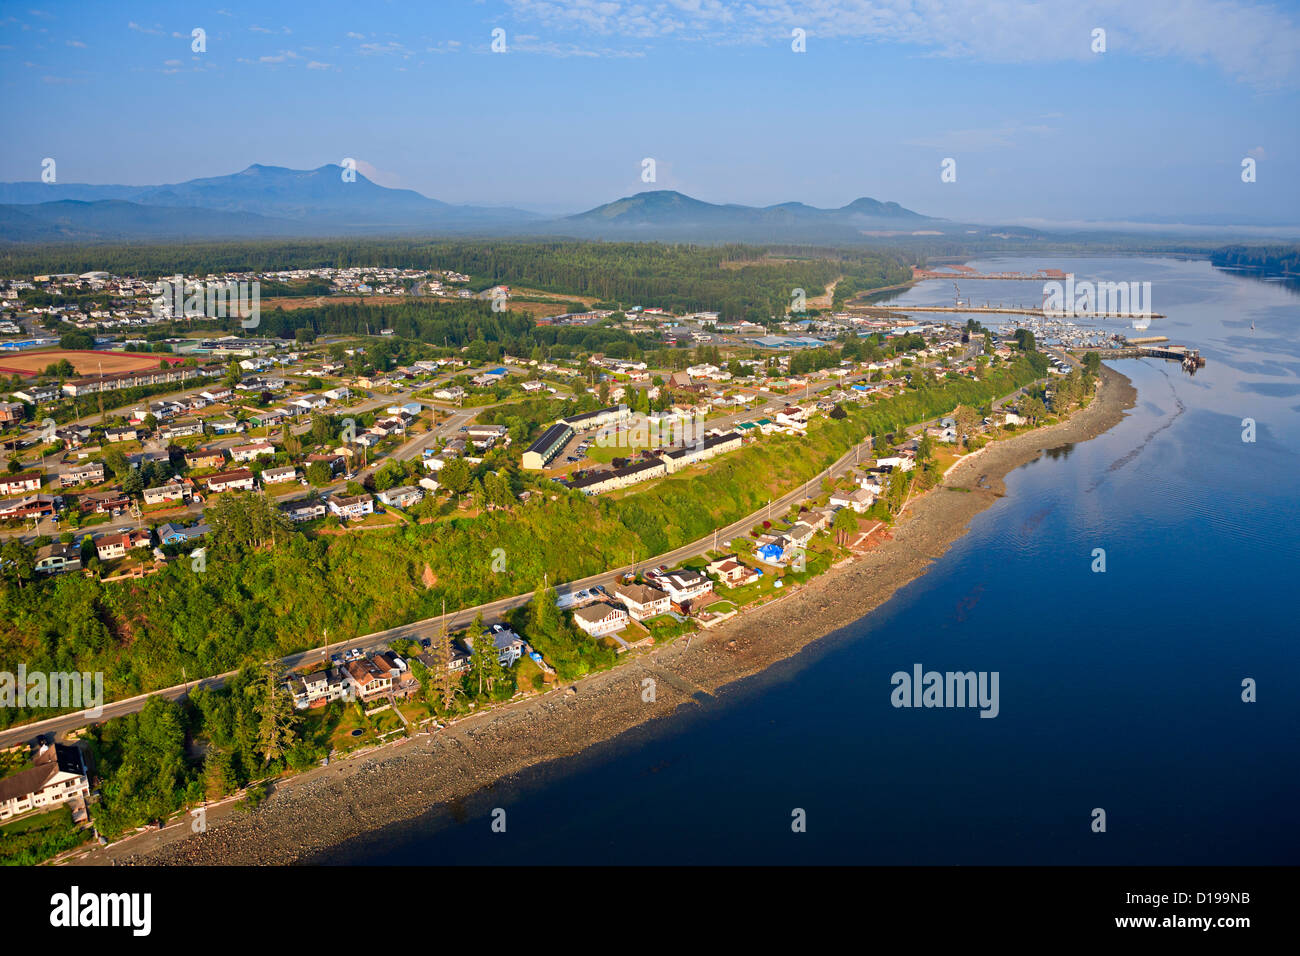 Aerial view of the logging town of Port McNeill, Vancouver Island, British Columbia, Canada Stock Photo